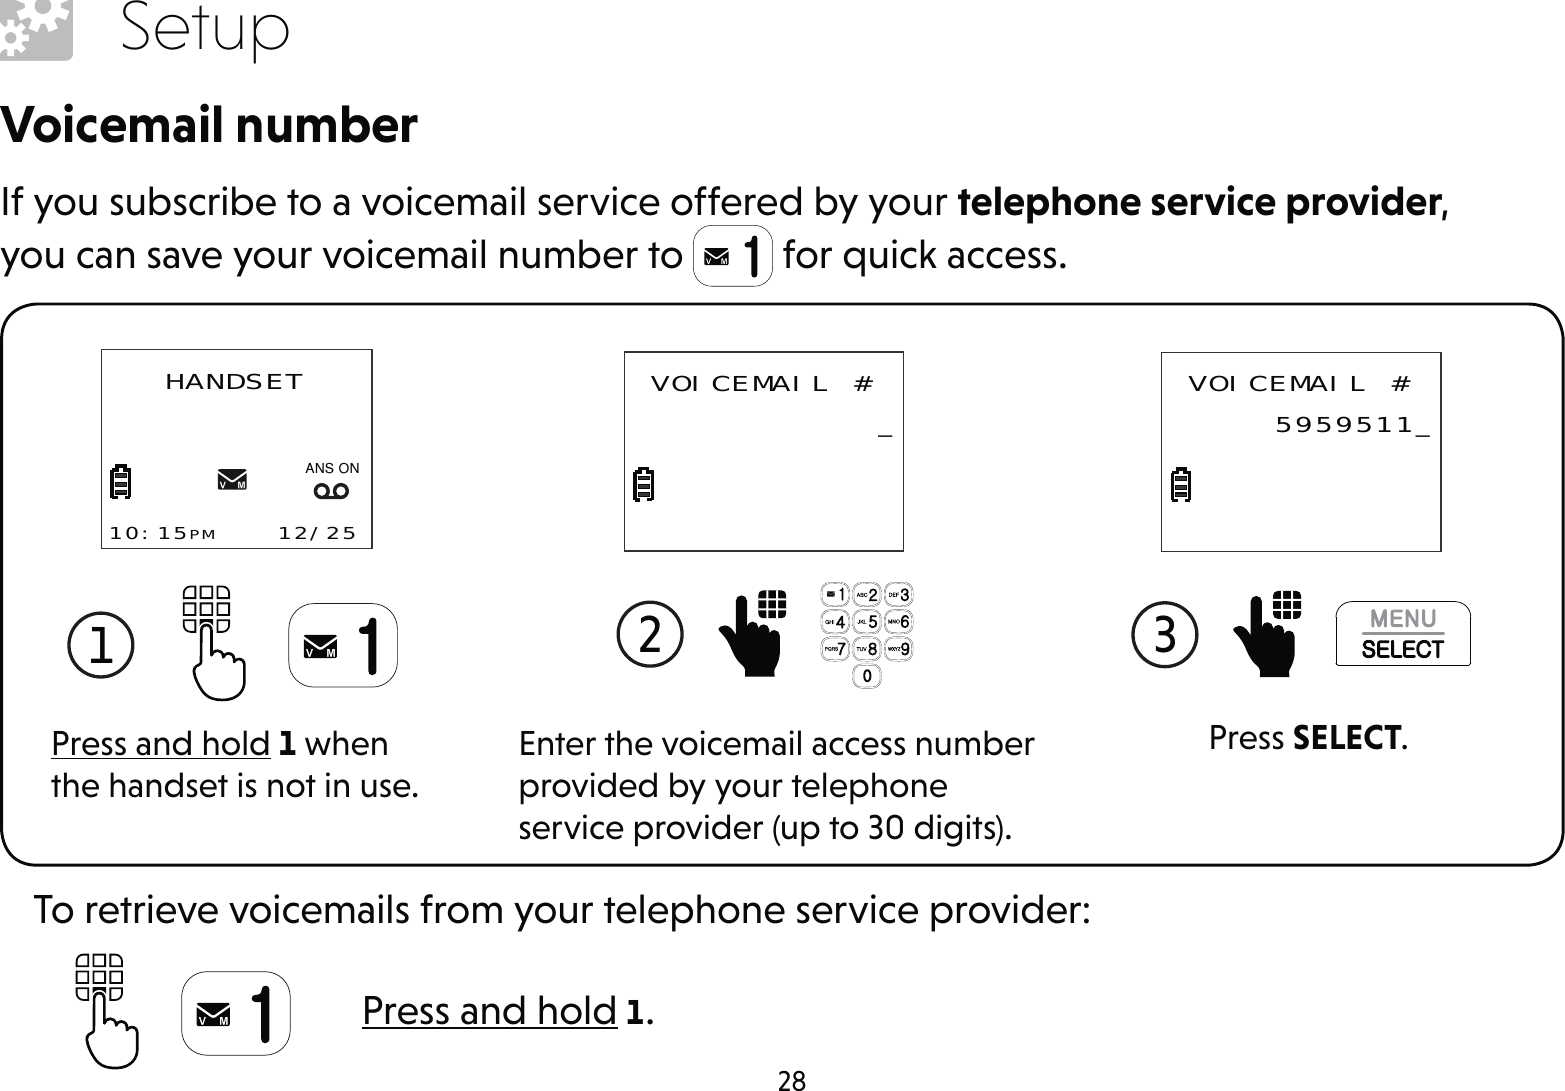 28SetupVoicemail numberIf you subscribe to a voicemail service offered by your telephone service provider, you can save your voicemail number to   for quick access.Press and hold 1 when the handset is not in use.1 HANDSET10:15PM    12/25$1621Enter the voicemail access number provided by your telephone service provider (up to 30 digits).2  VOICEMAIL # _Press SELECT.3  VOICEMAIL # 5959511_Press and hold 1.To retrieve voicemails from your telephone service provider: